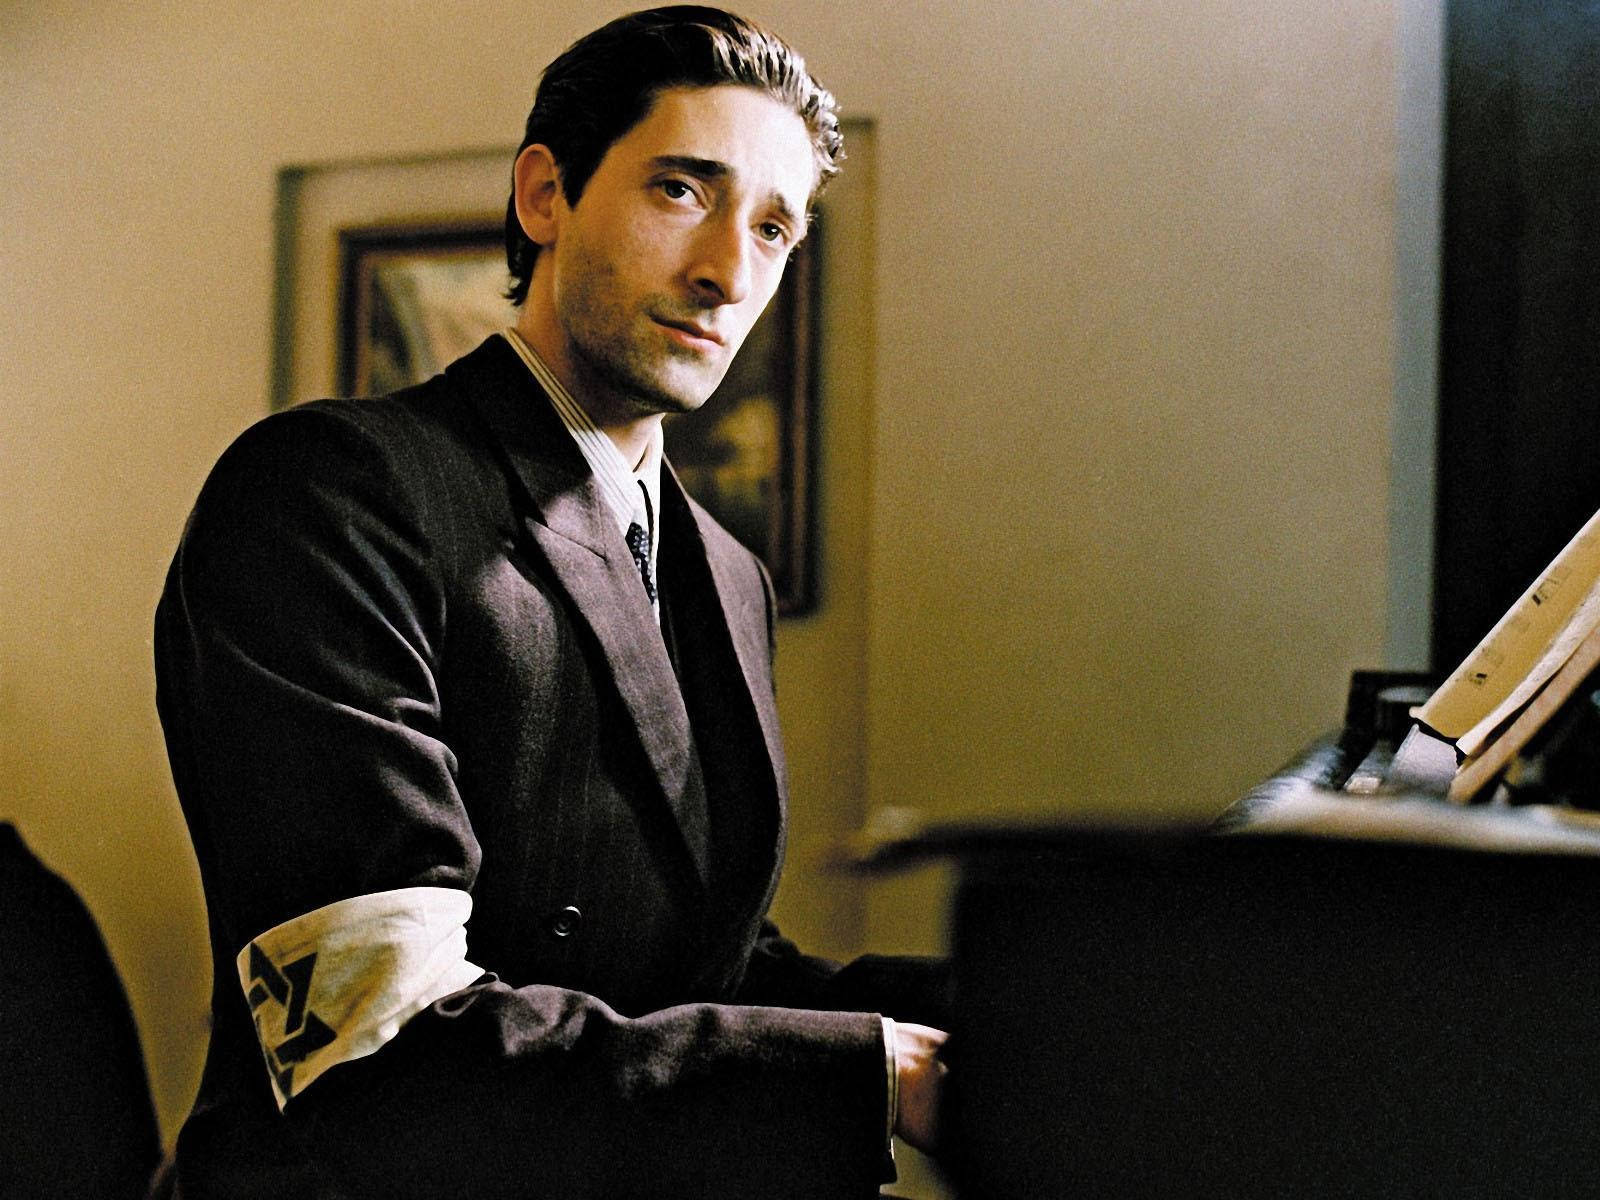 Award-winning Actor Adrien Brody In 'the Pianist' Background